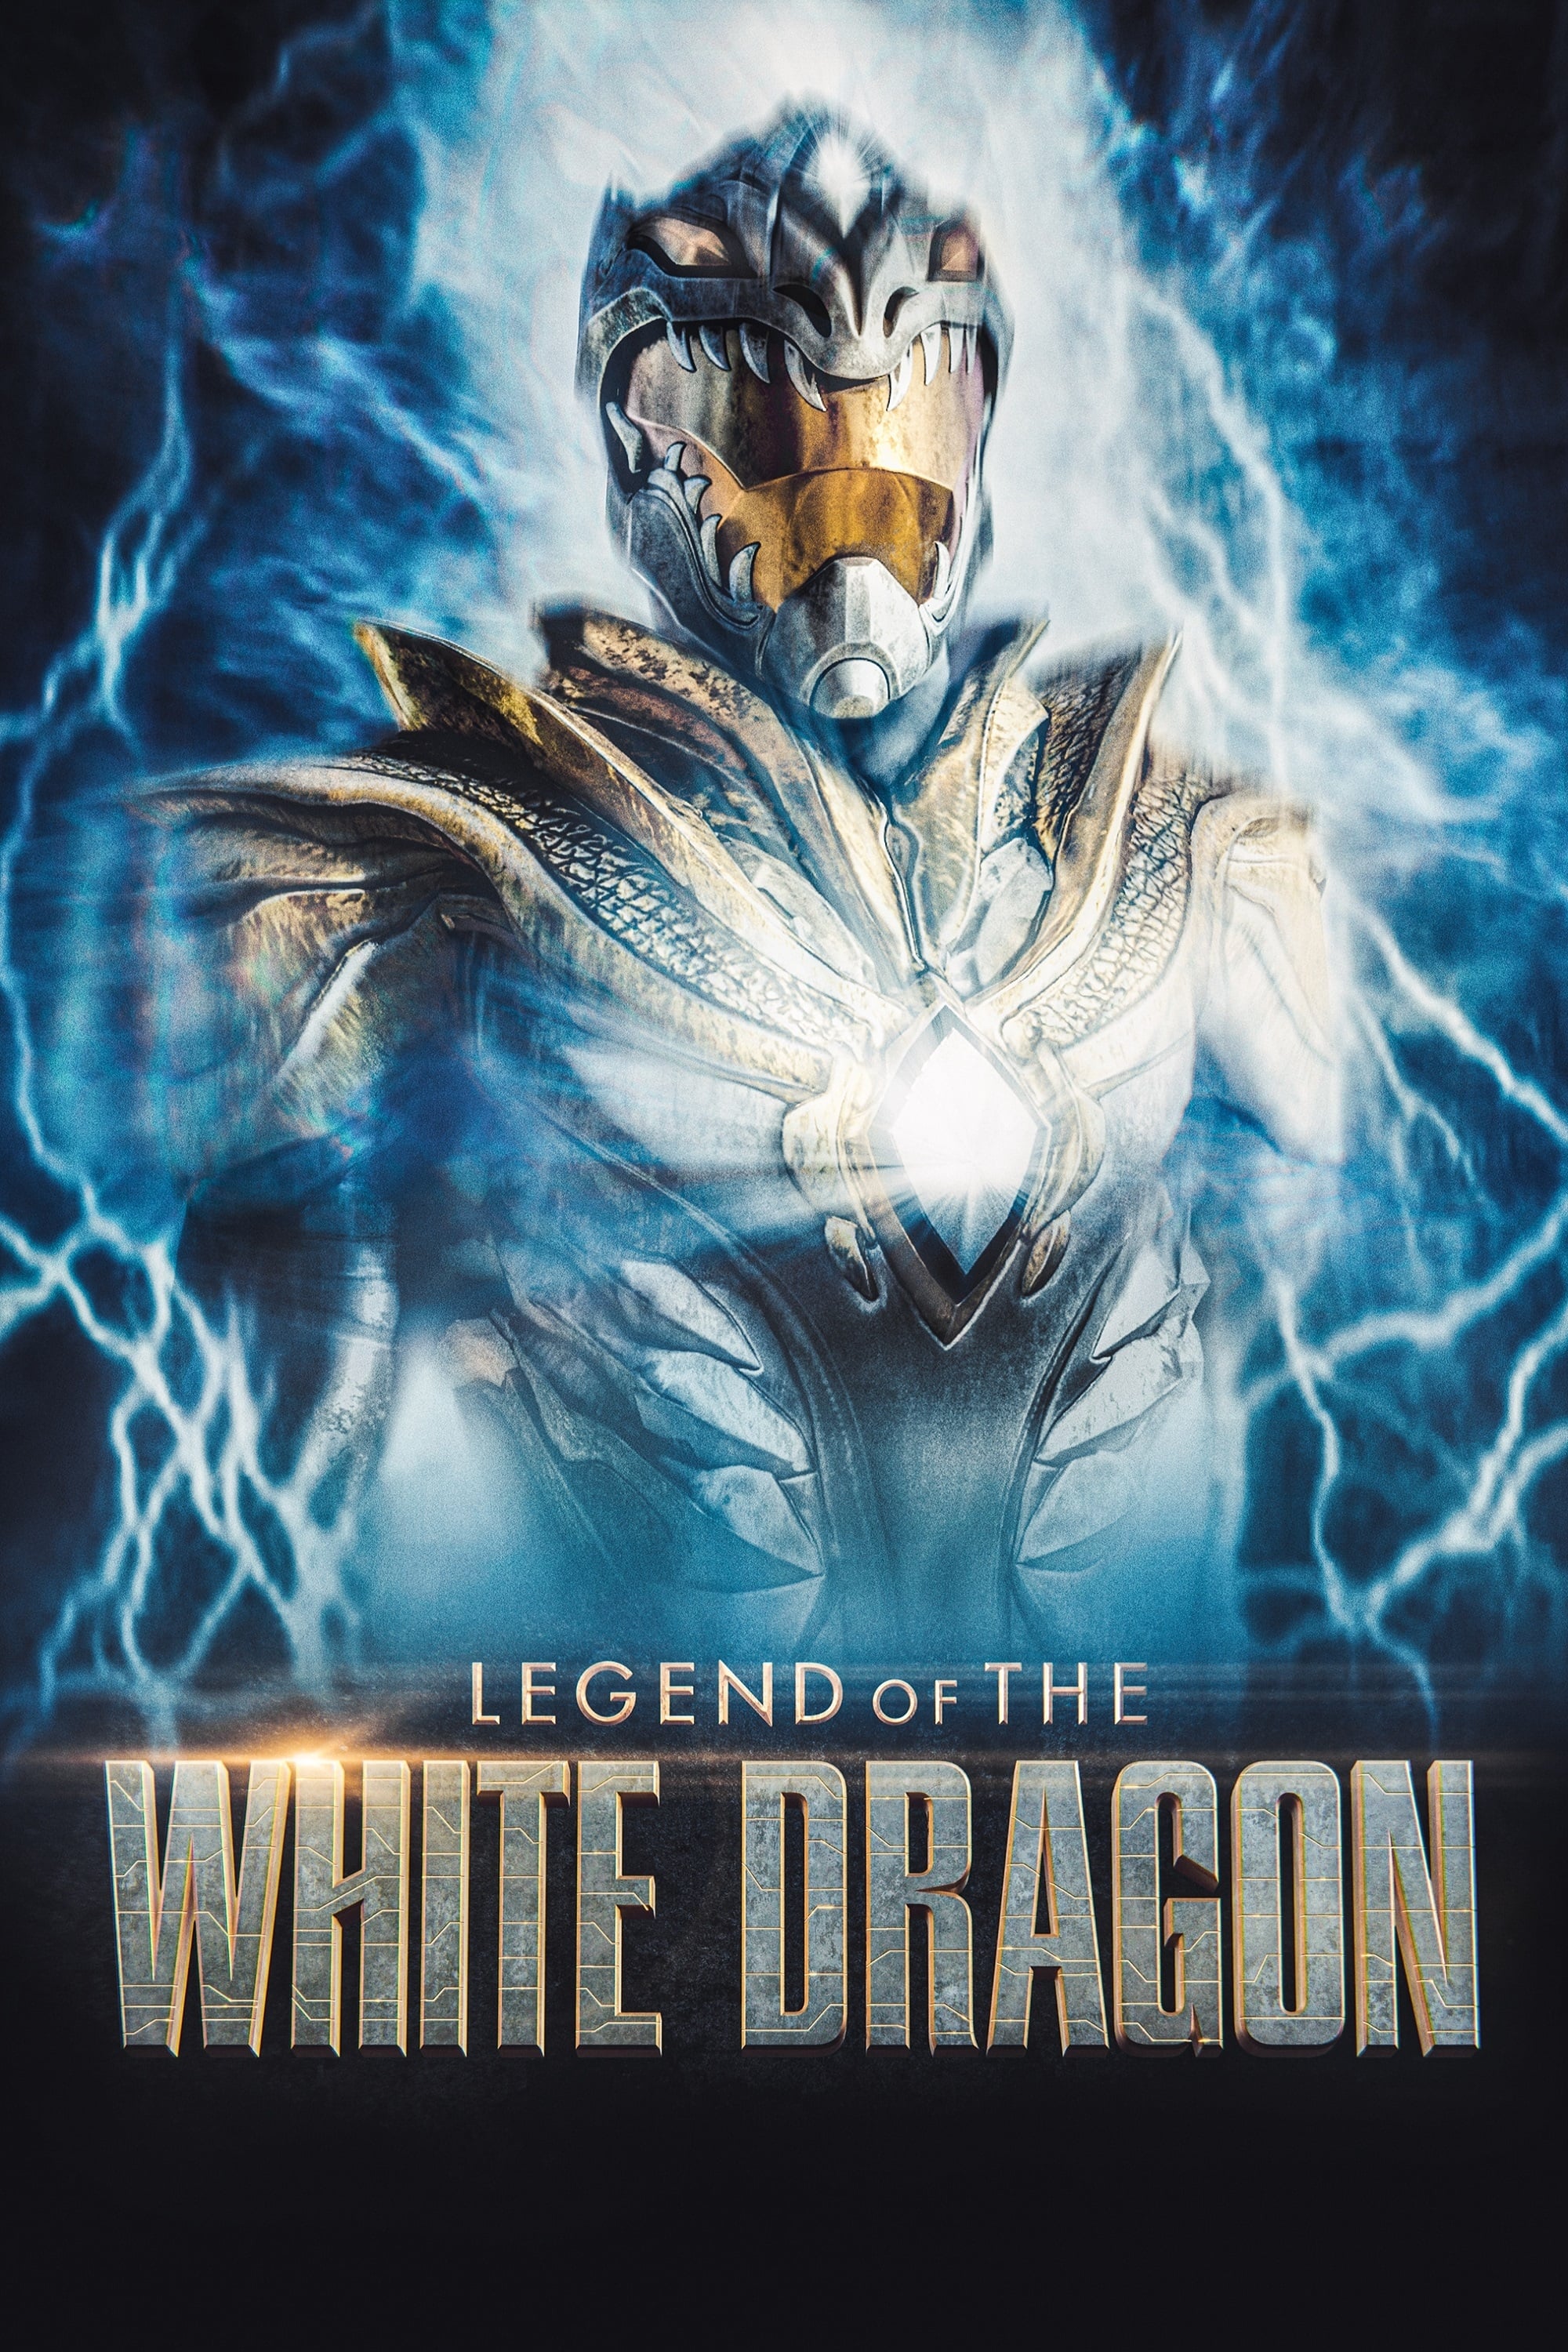 WATCH !! Legend of the White Dragon () FULLMOVIE ONLINE FREE ENGLISH/Dub/SUB Action STREAMINGS Movie Poster